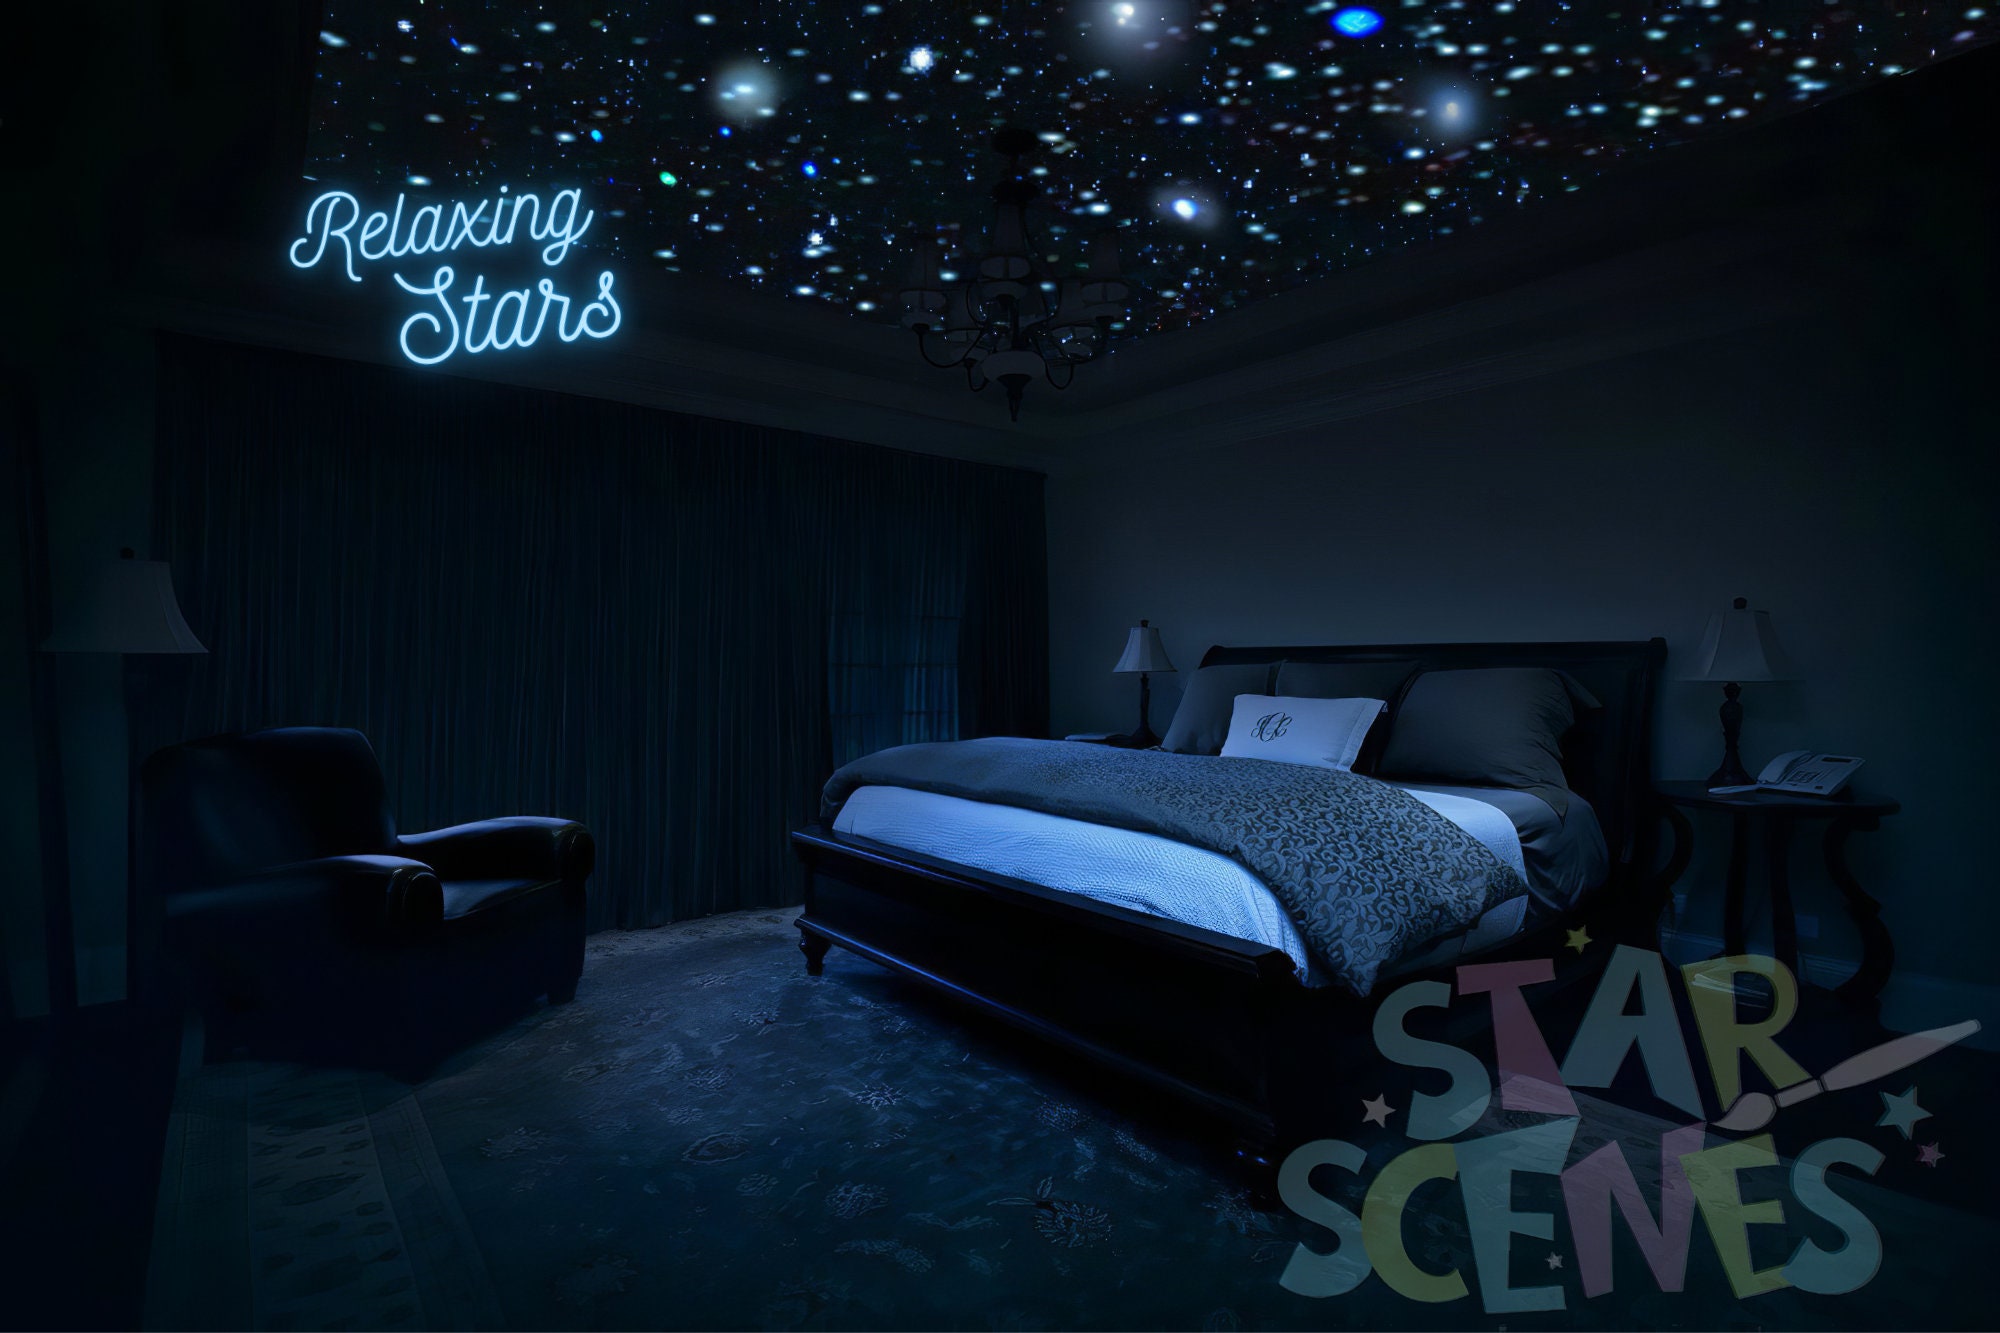 Reusable Realistic Glow Stars Ideal Gift for Renters College Dorm Decor.  Removable Glow in the Dark Star Ceiling Decals for Bedroom. 